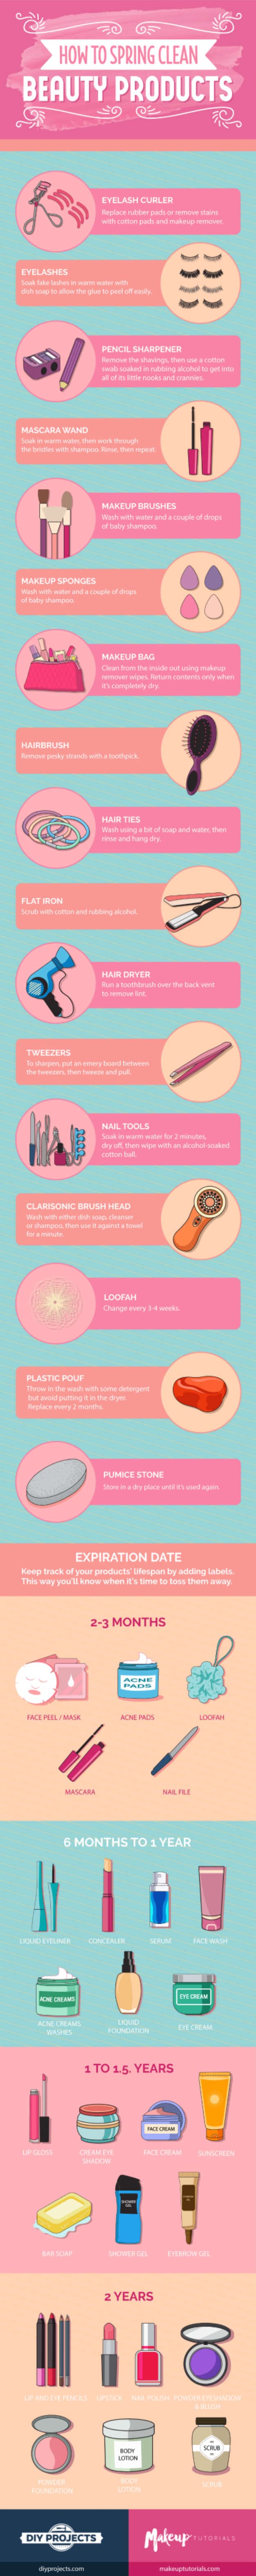 How To Spring Clean Beauty Products